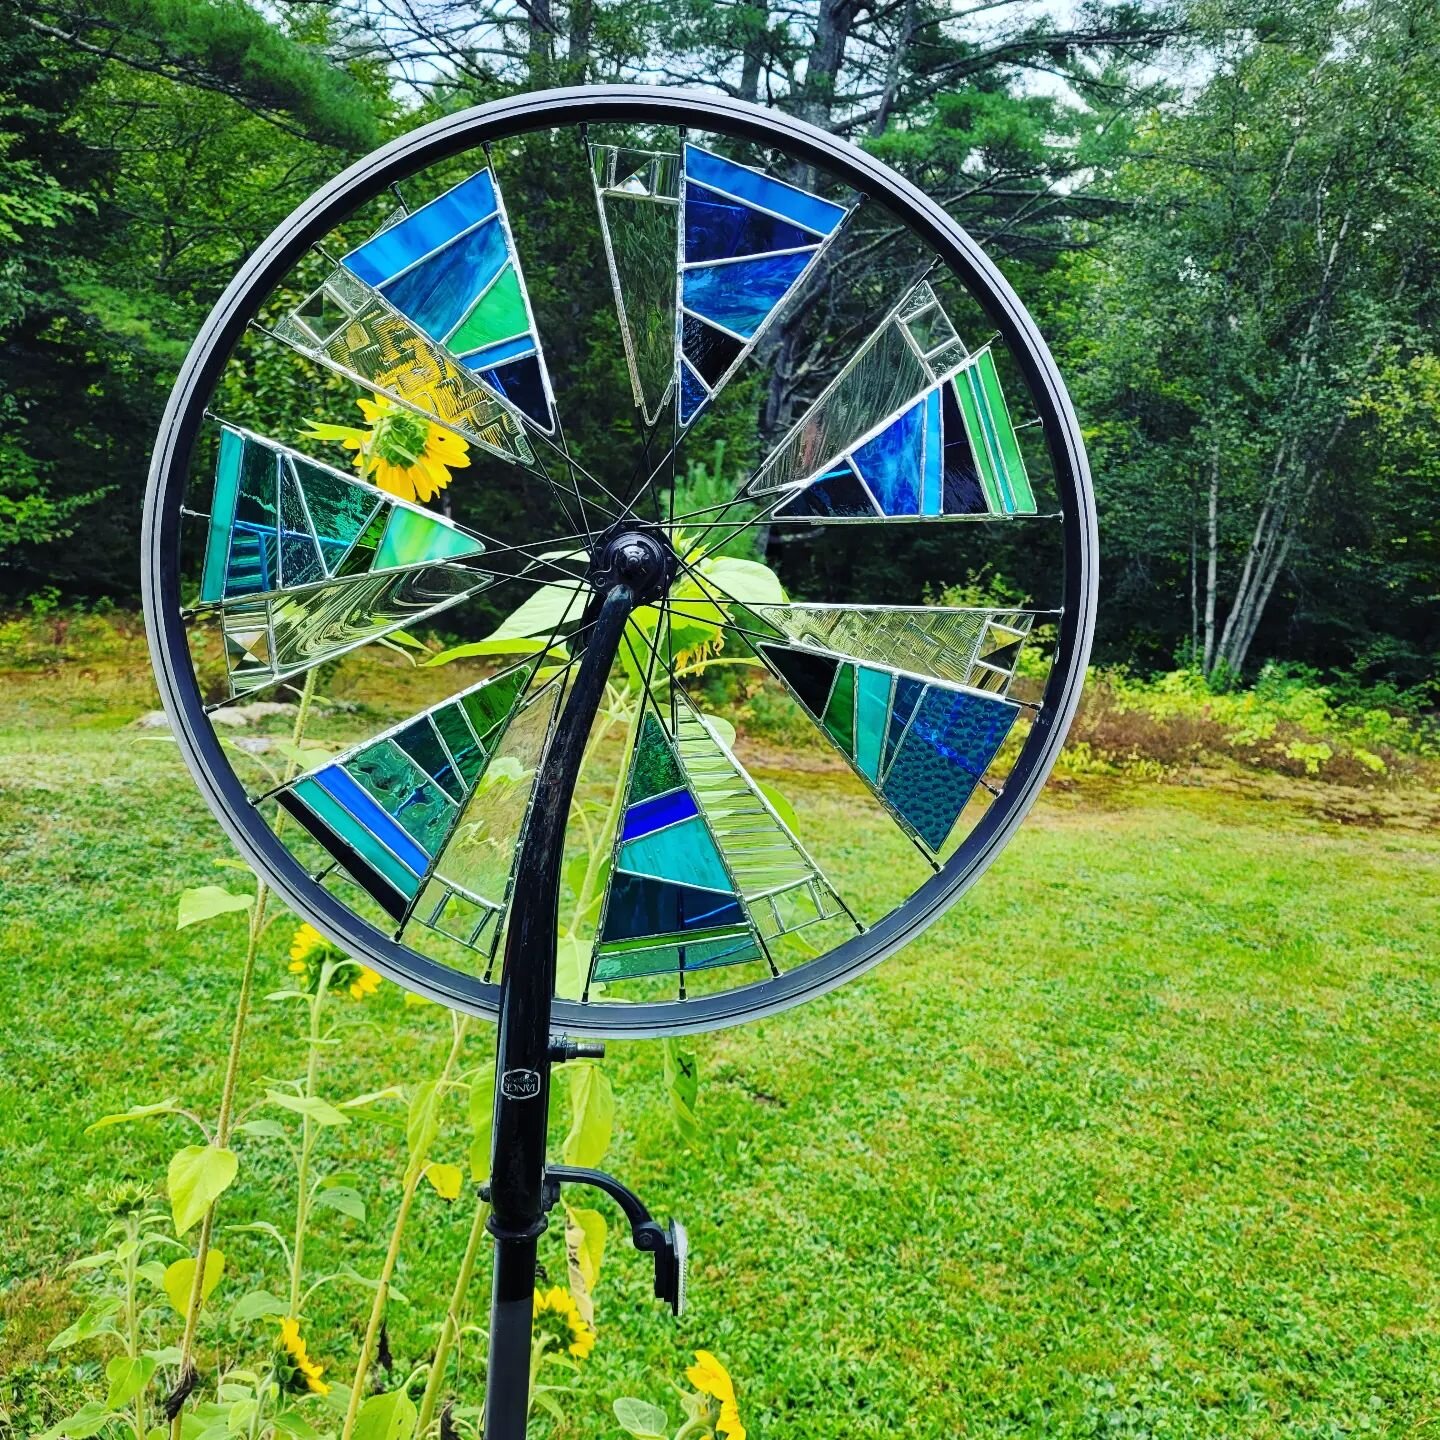 We'll have lots of garden art for sale at this year's open house.

Oct 1 10-4pm.  Oct 2 10-2pm.

1029 Bear River Rd,  Newry ME

#artforsale #openhouse